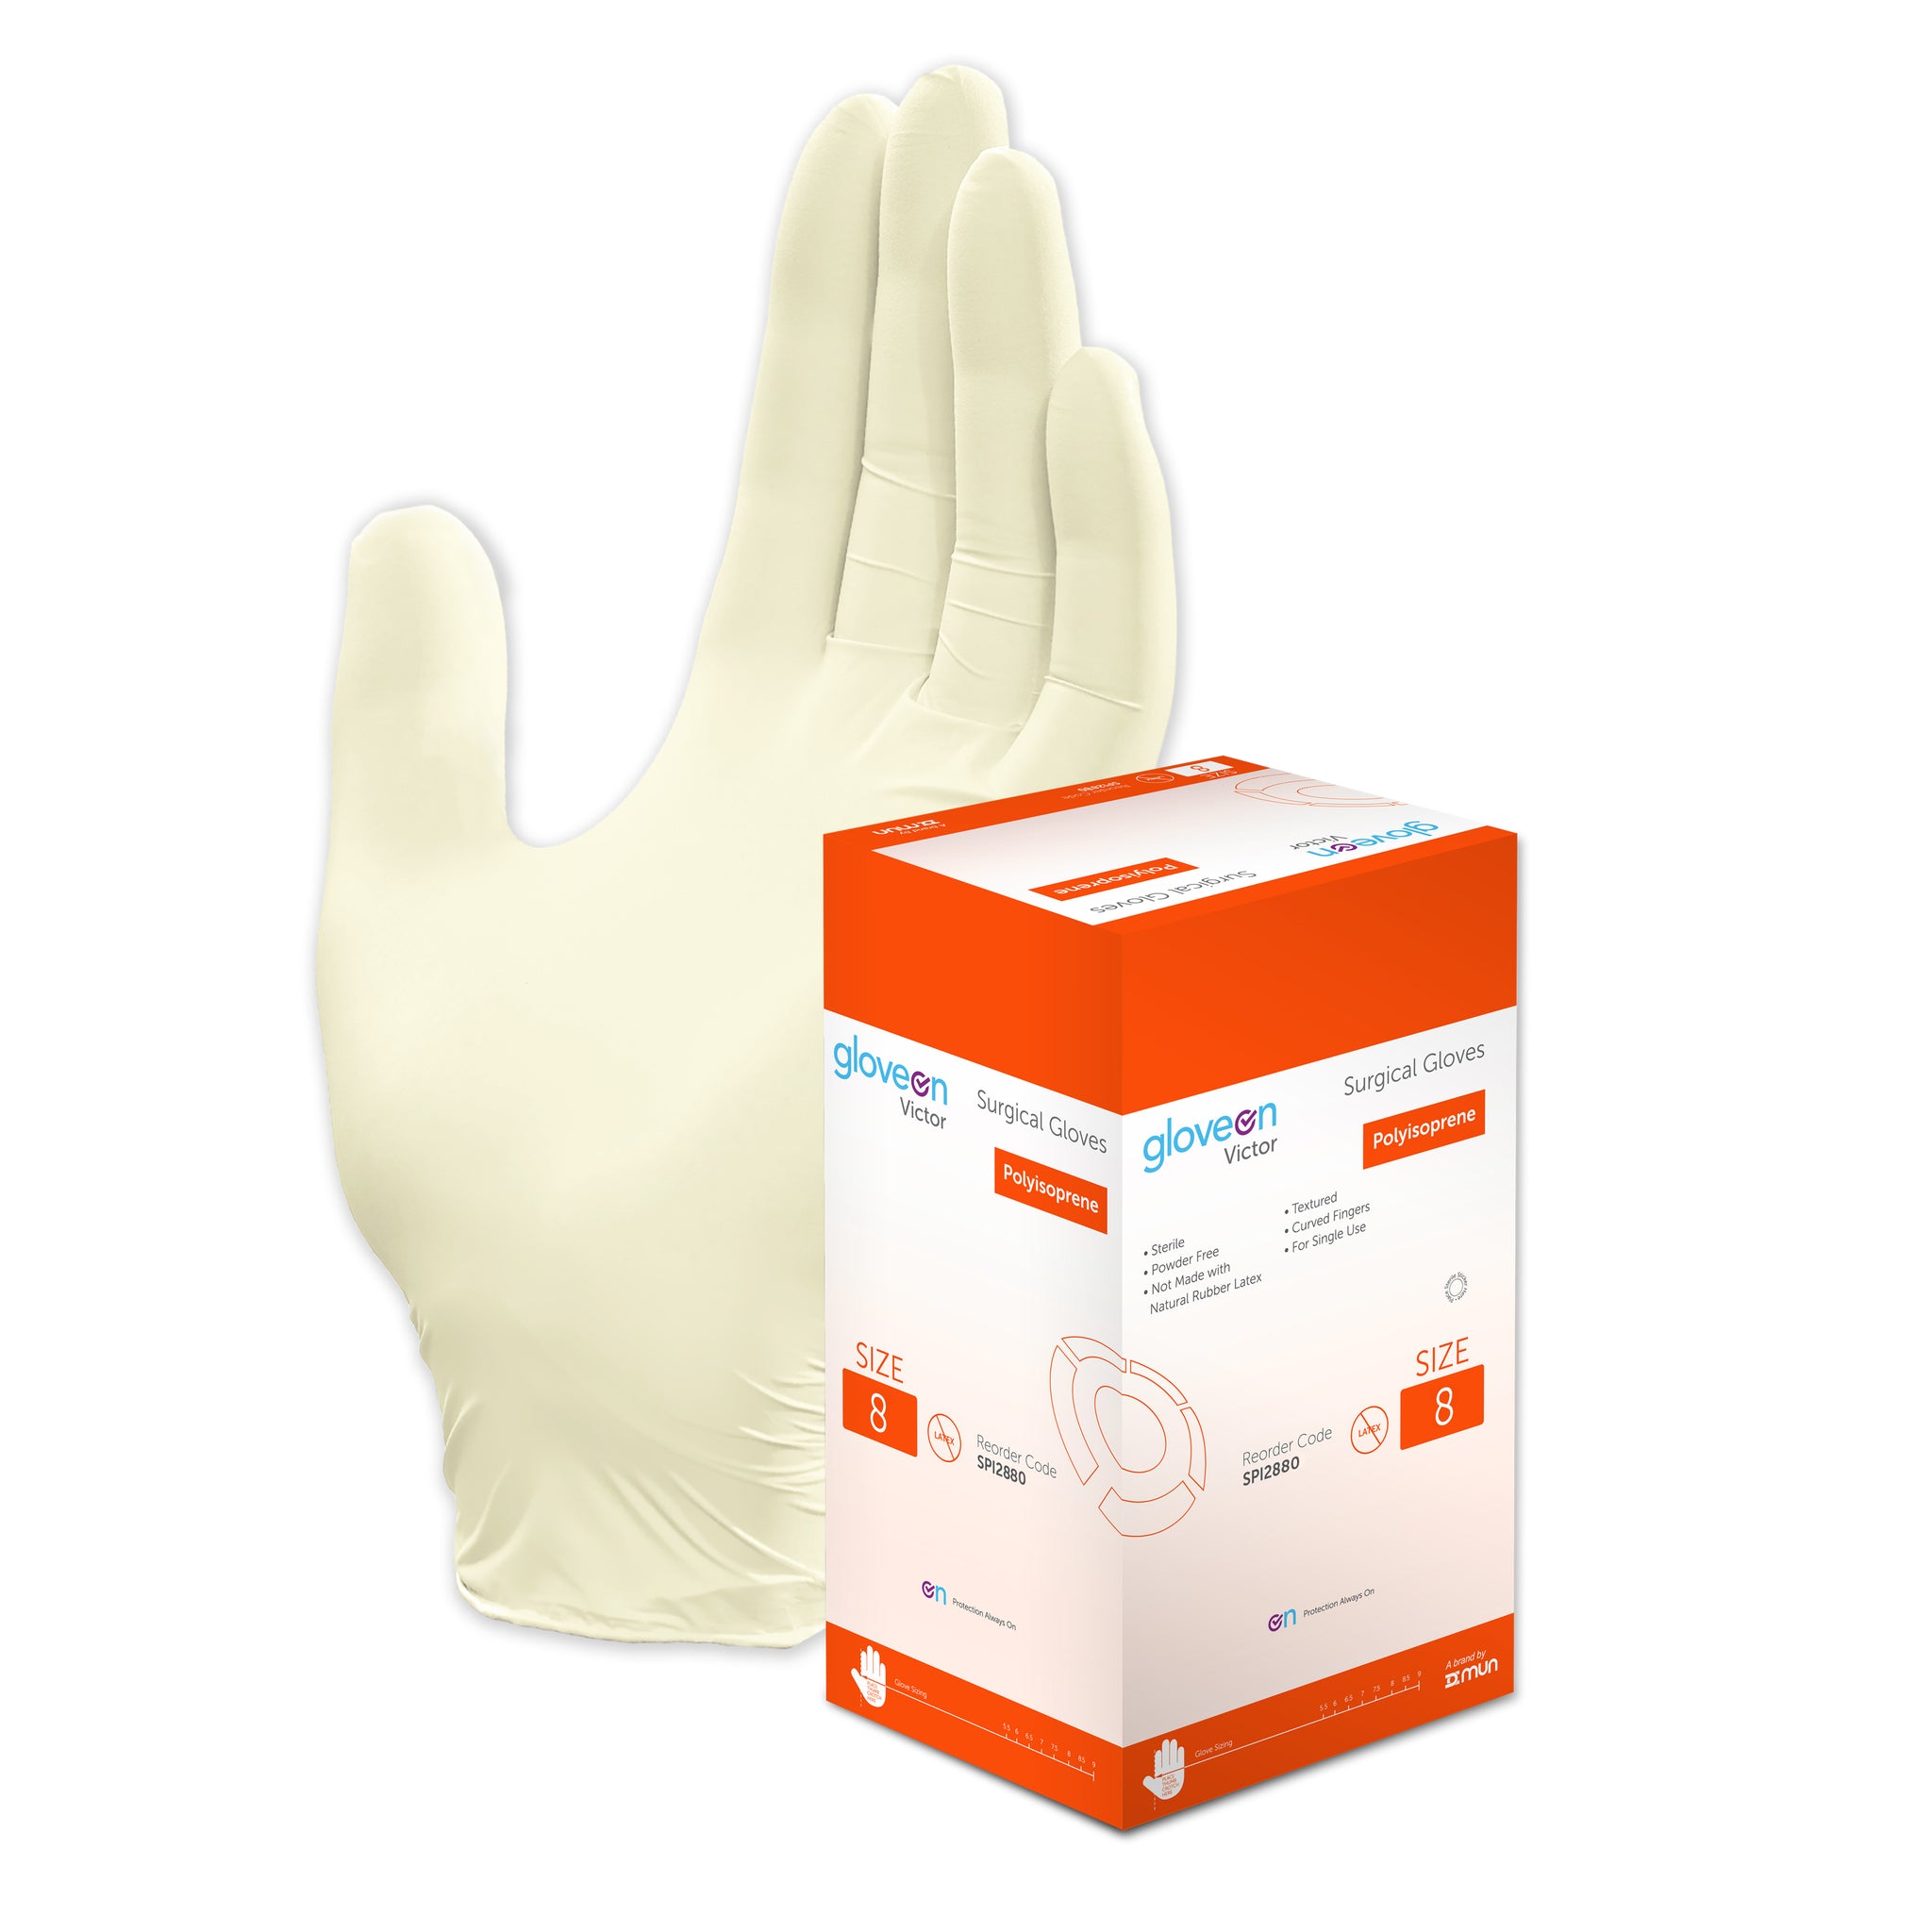 Polyisoprene, Powder Free, Textured, Curved Fingers, Sterile, White - Box of 100, 8